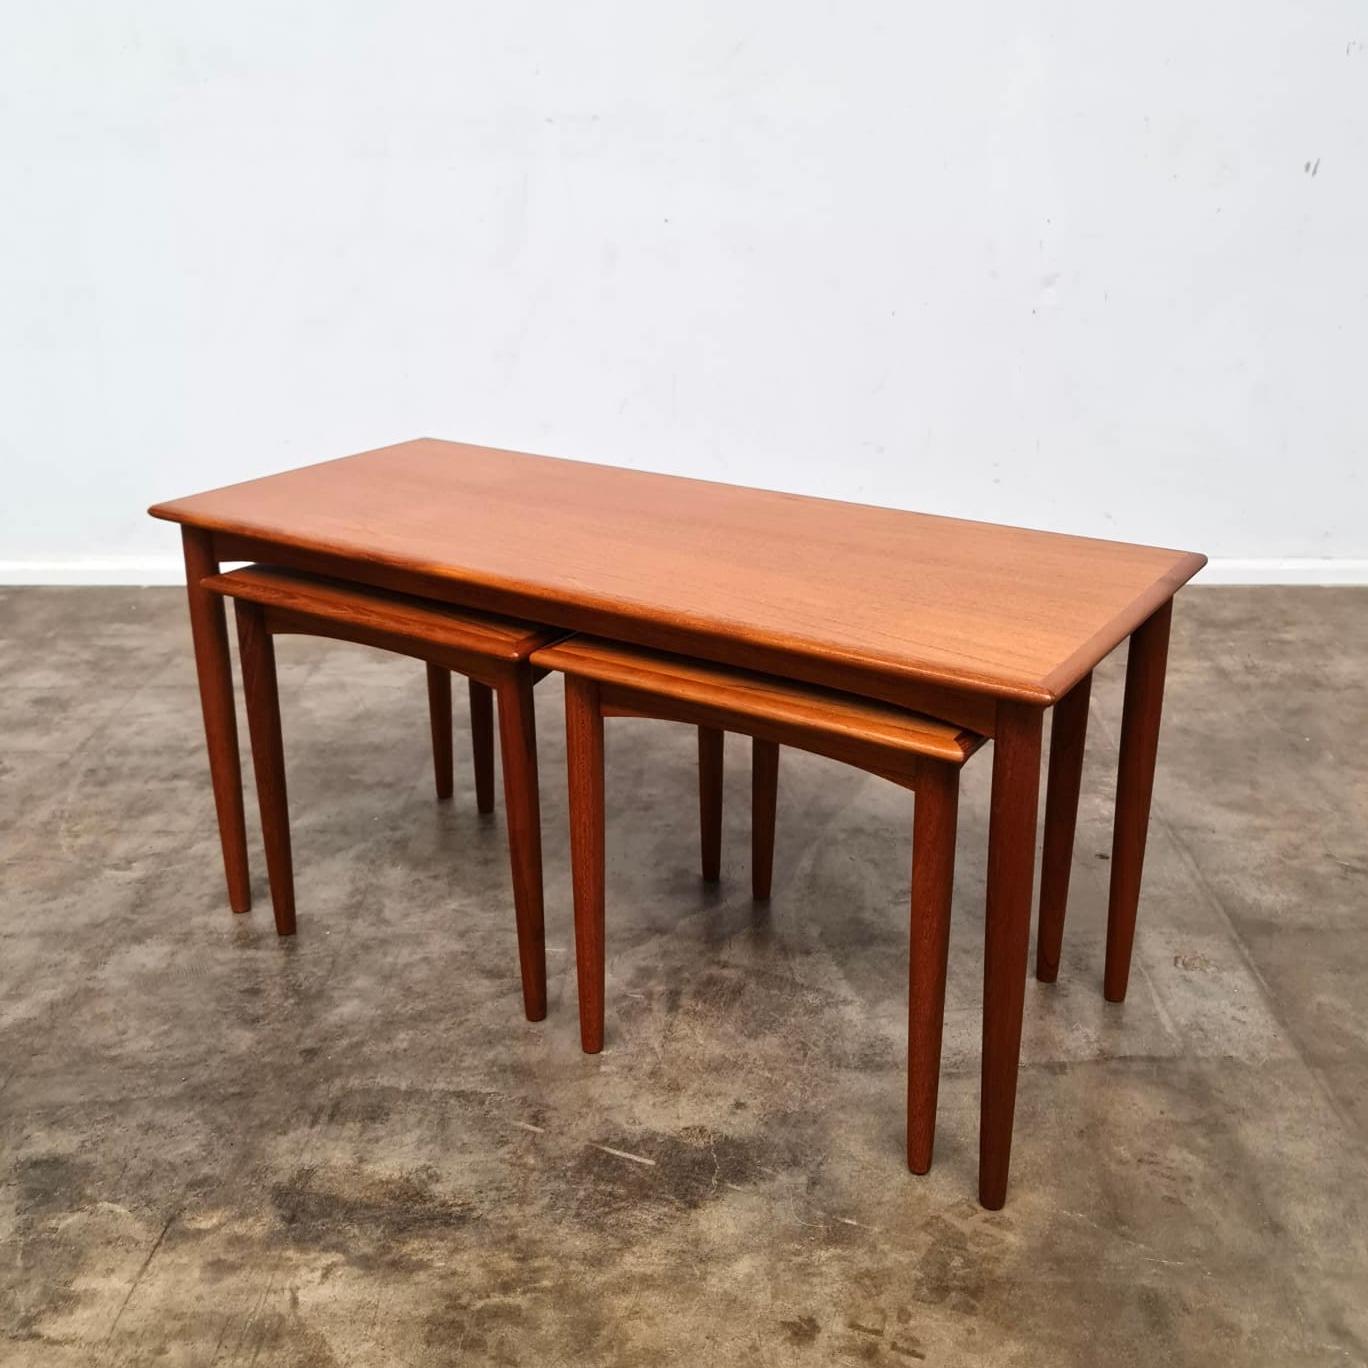 1960’s Parker Nordic Nesting Tables. 
Featuring beautiful grain finish with rounded bullnose edges and tapered legs.

Freshly stripped and refinished.

Mother - H 44cm, L 90cm, W 38cm
Babies - H 38cm, W 38cm

Please contact us for an Australia wide